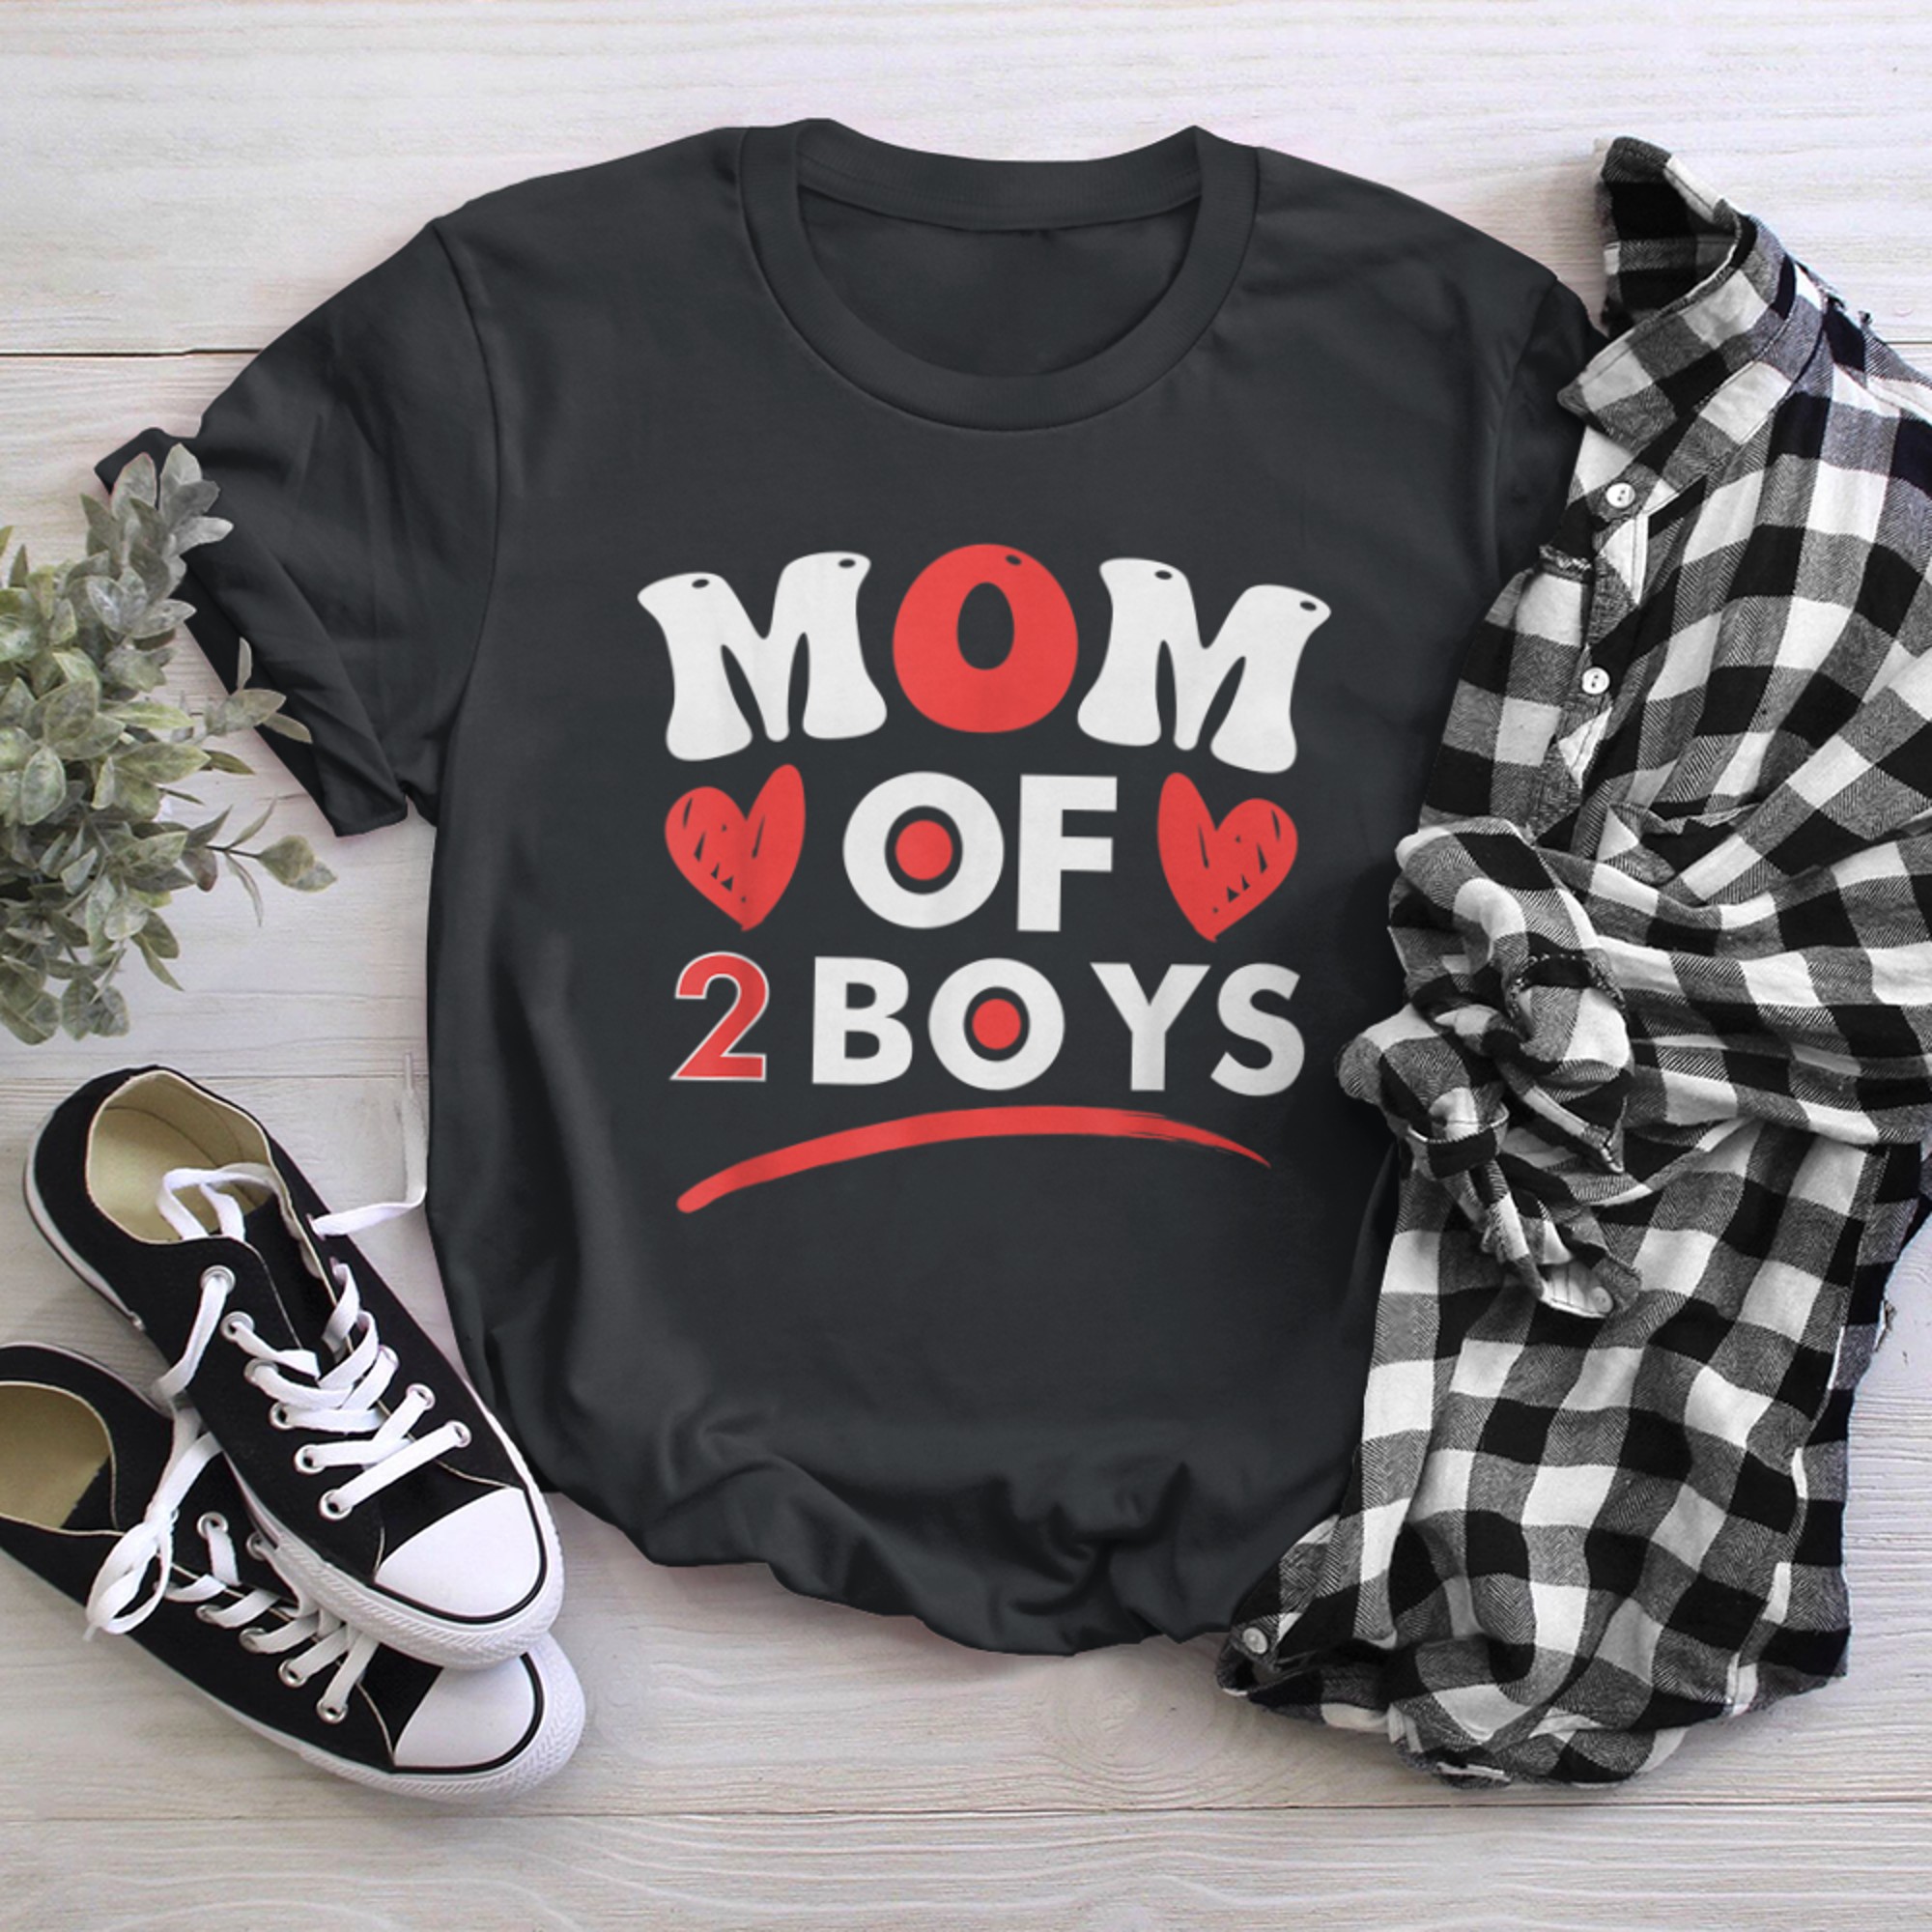 MOM OF from Son Mothers Day Birthday (11) t-shirt black